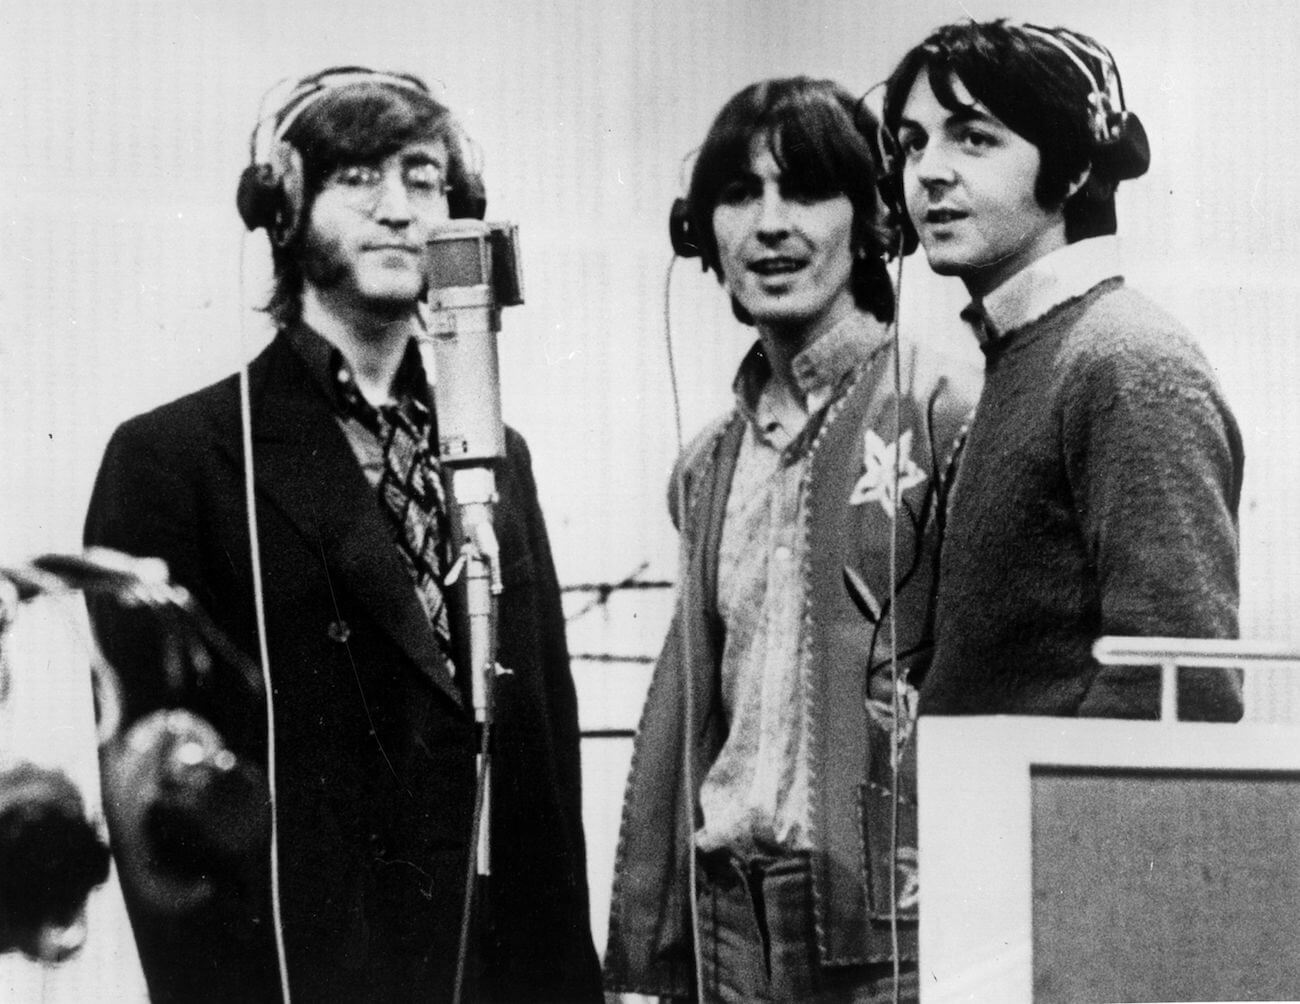 The Beatles recording songs in the studio in 1968.